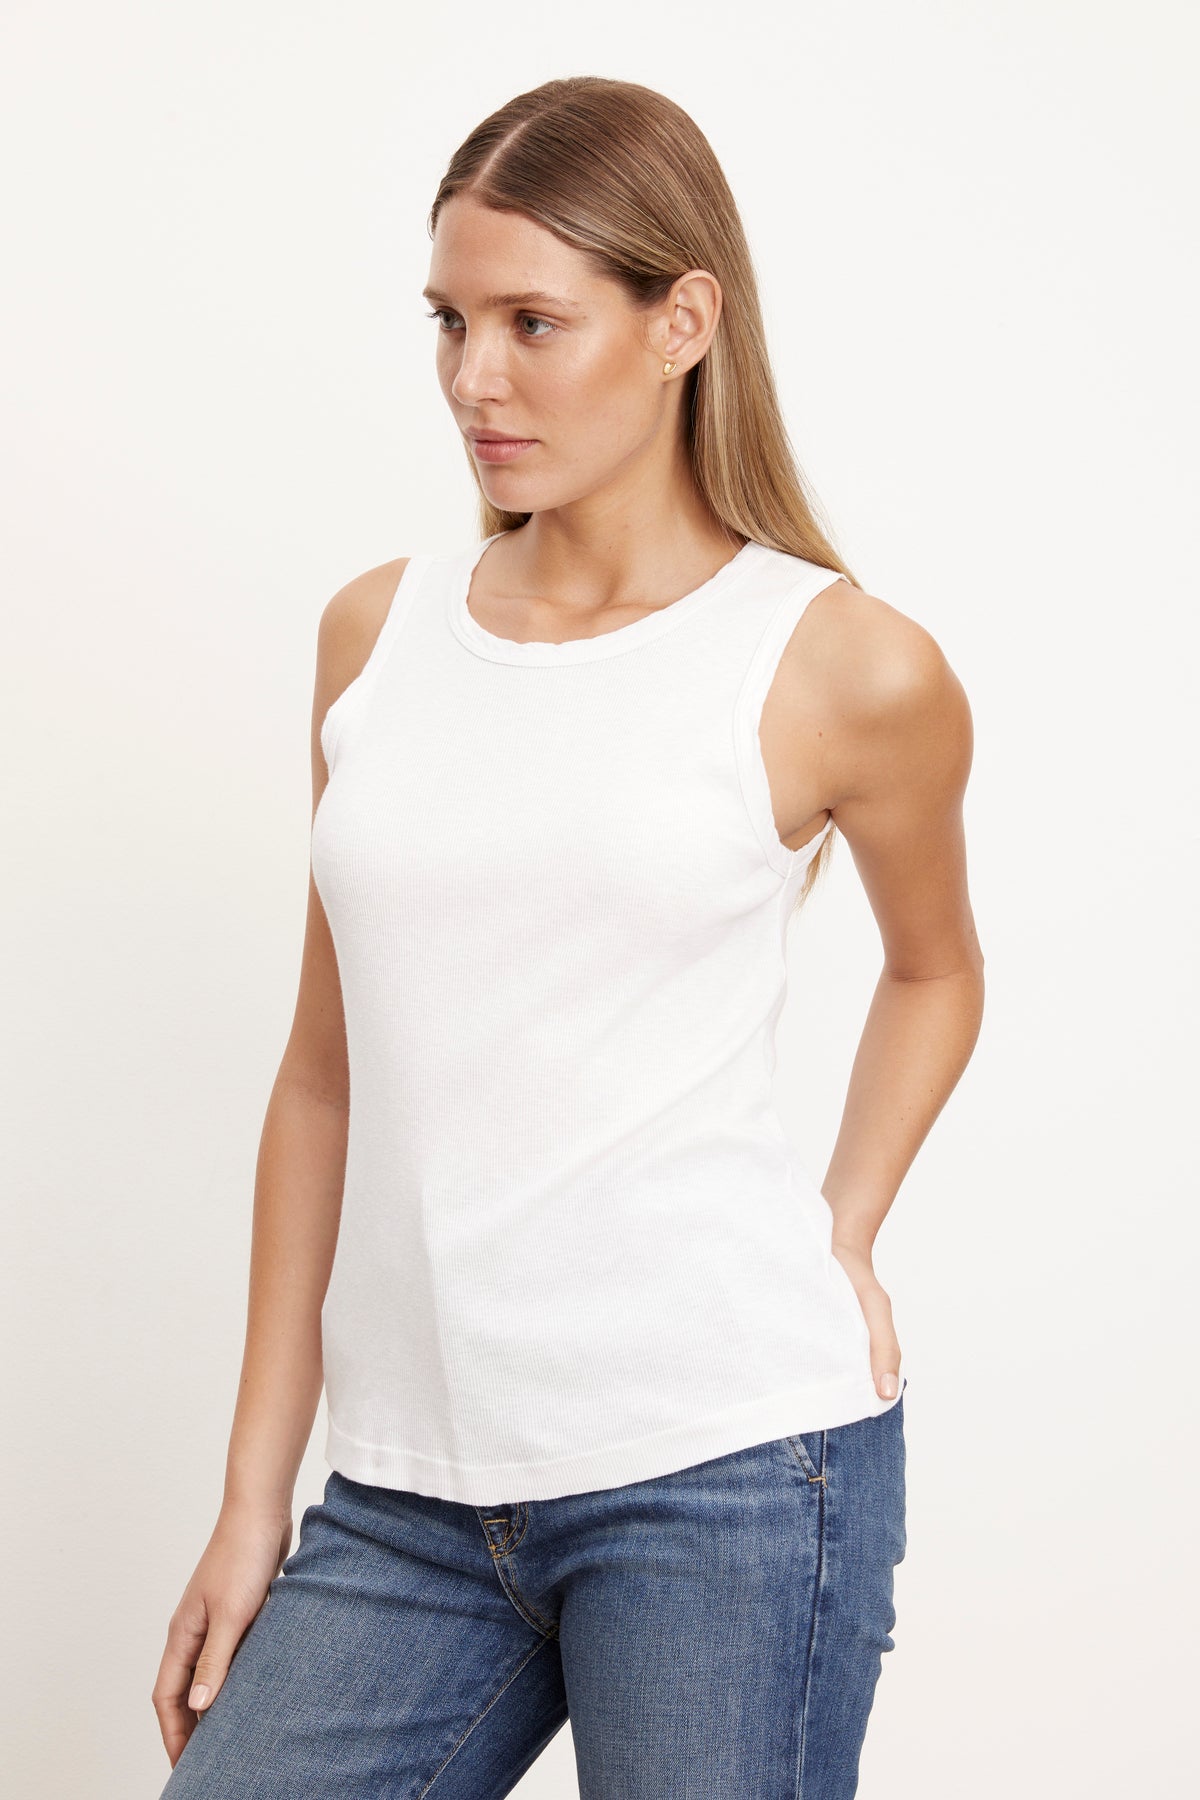   a woman wearing a white MAXIE RIBBED TANK TOP by Velvet by Graham & Spencer and jeans. 